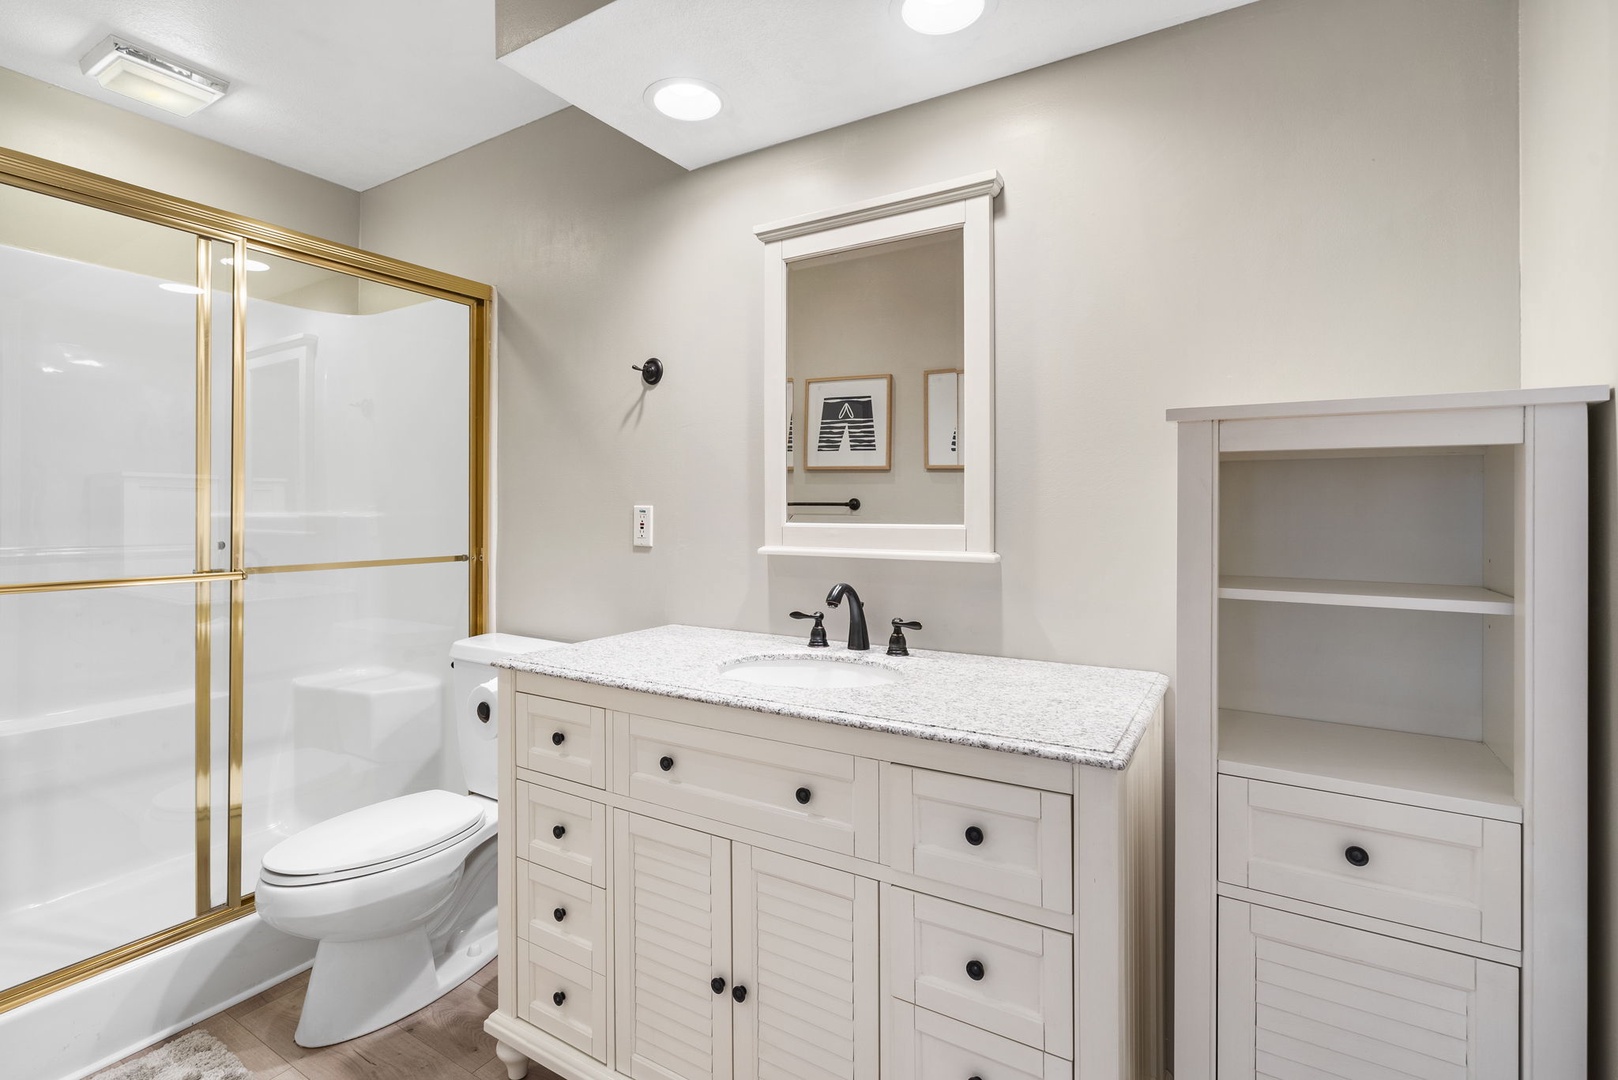 The second of two full bathrooms includes a single vanity & glass shower